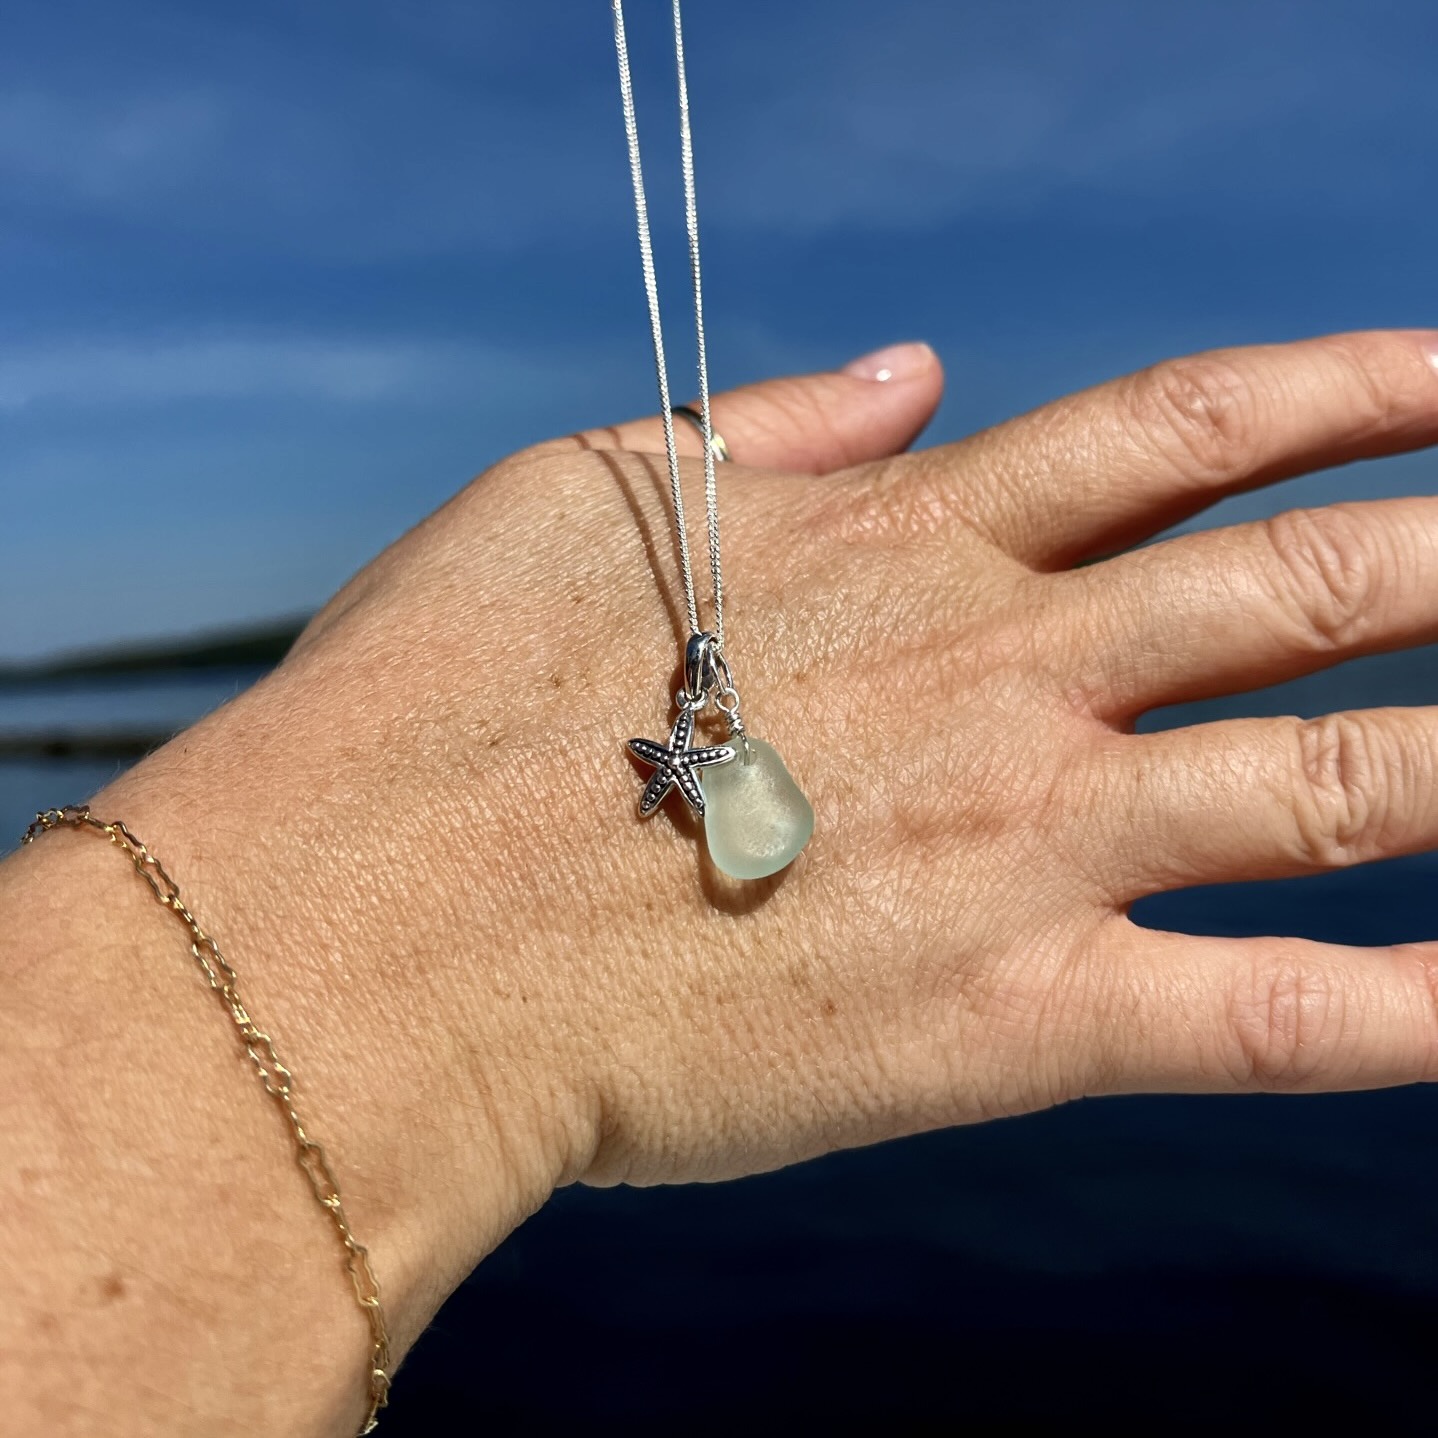 Teal Sea Glass Necklace - Lisa-Marie's Made in Maine